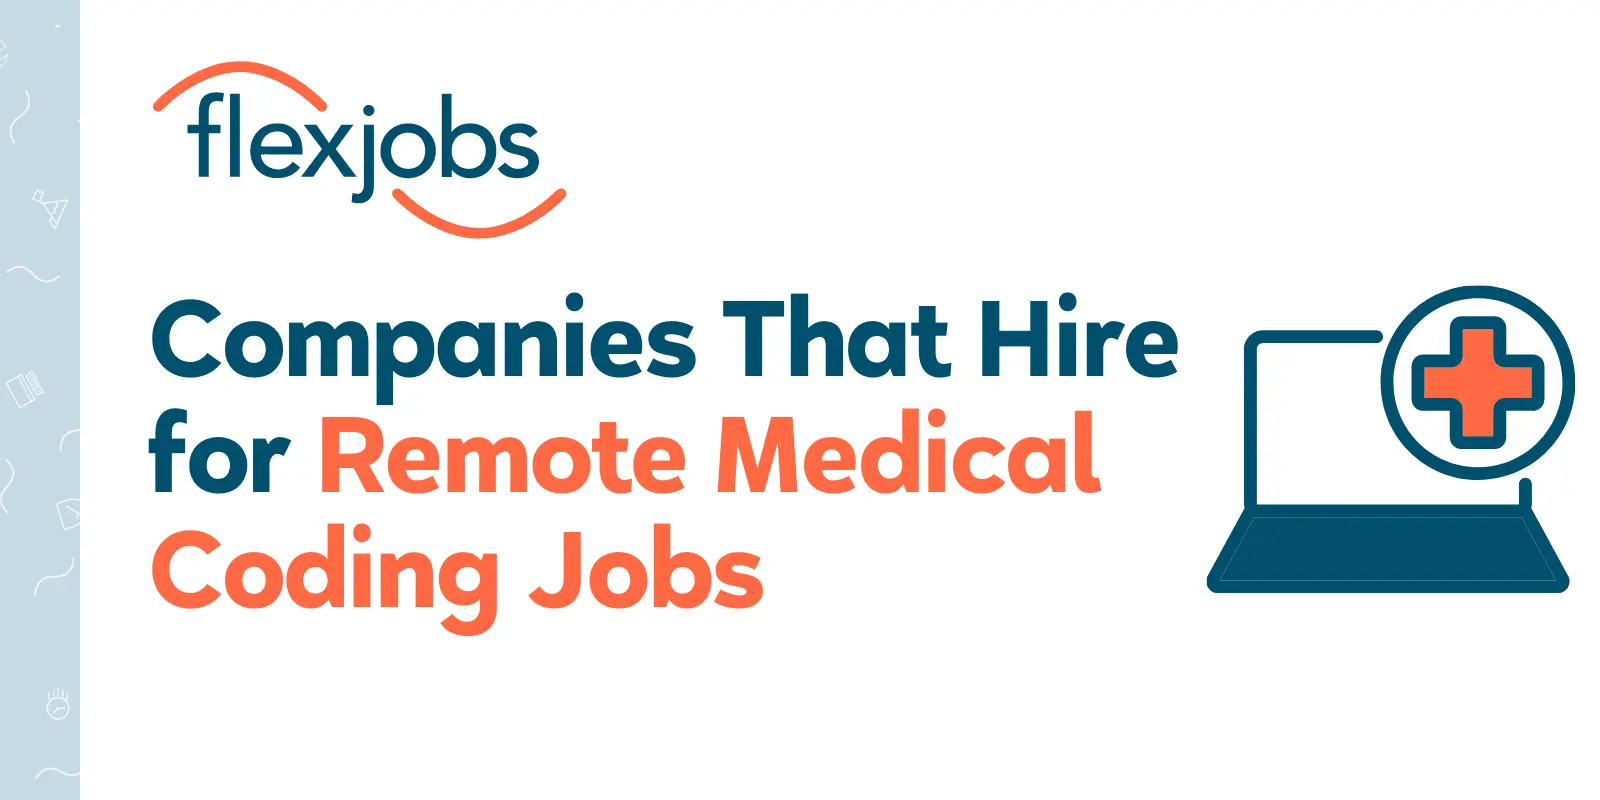 him coding auditor jobs - What is the salary of medical coding auditor in India